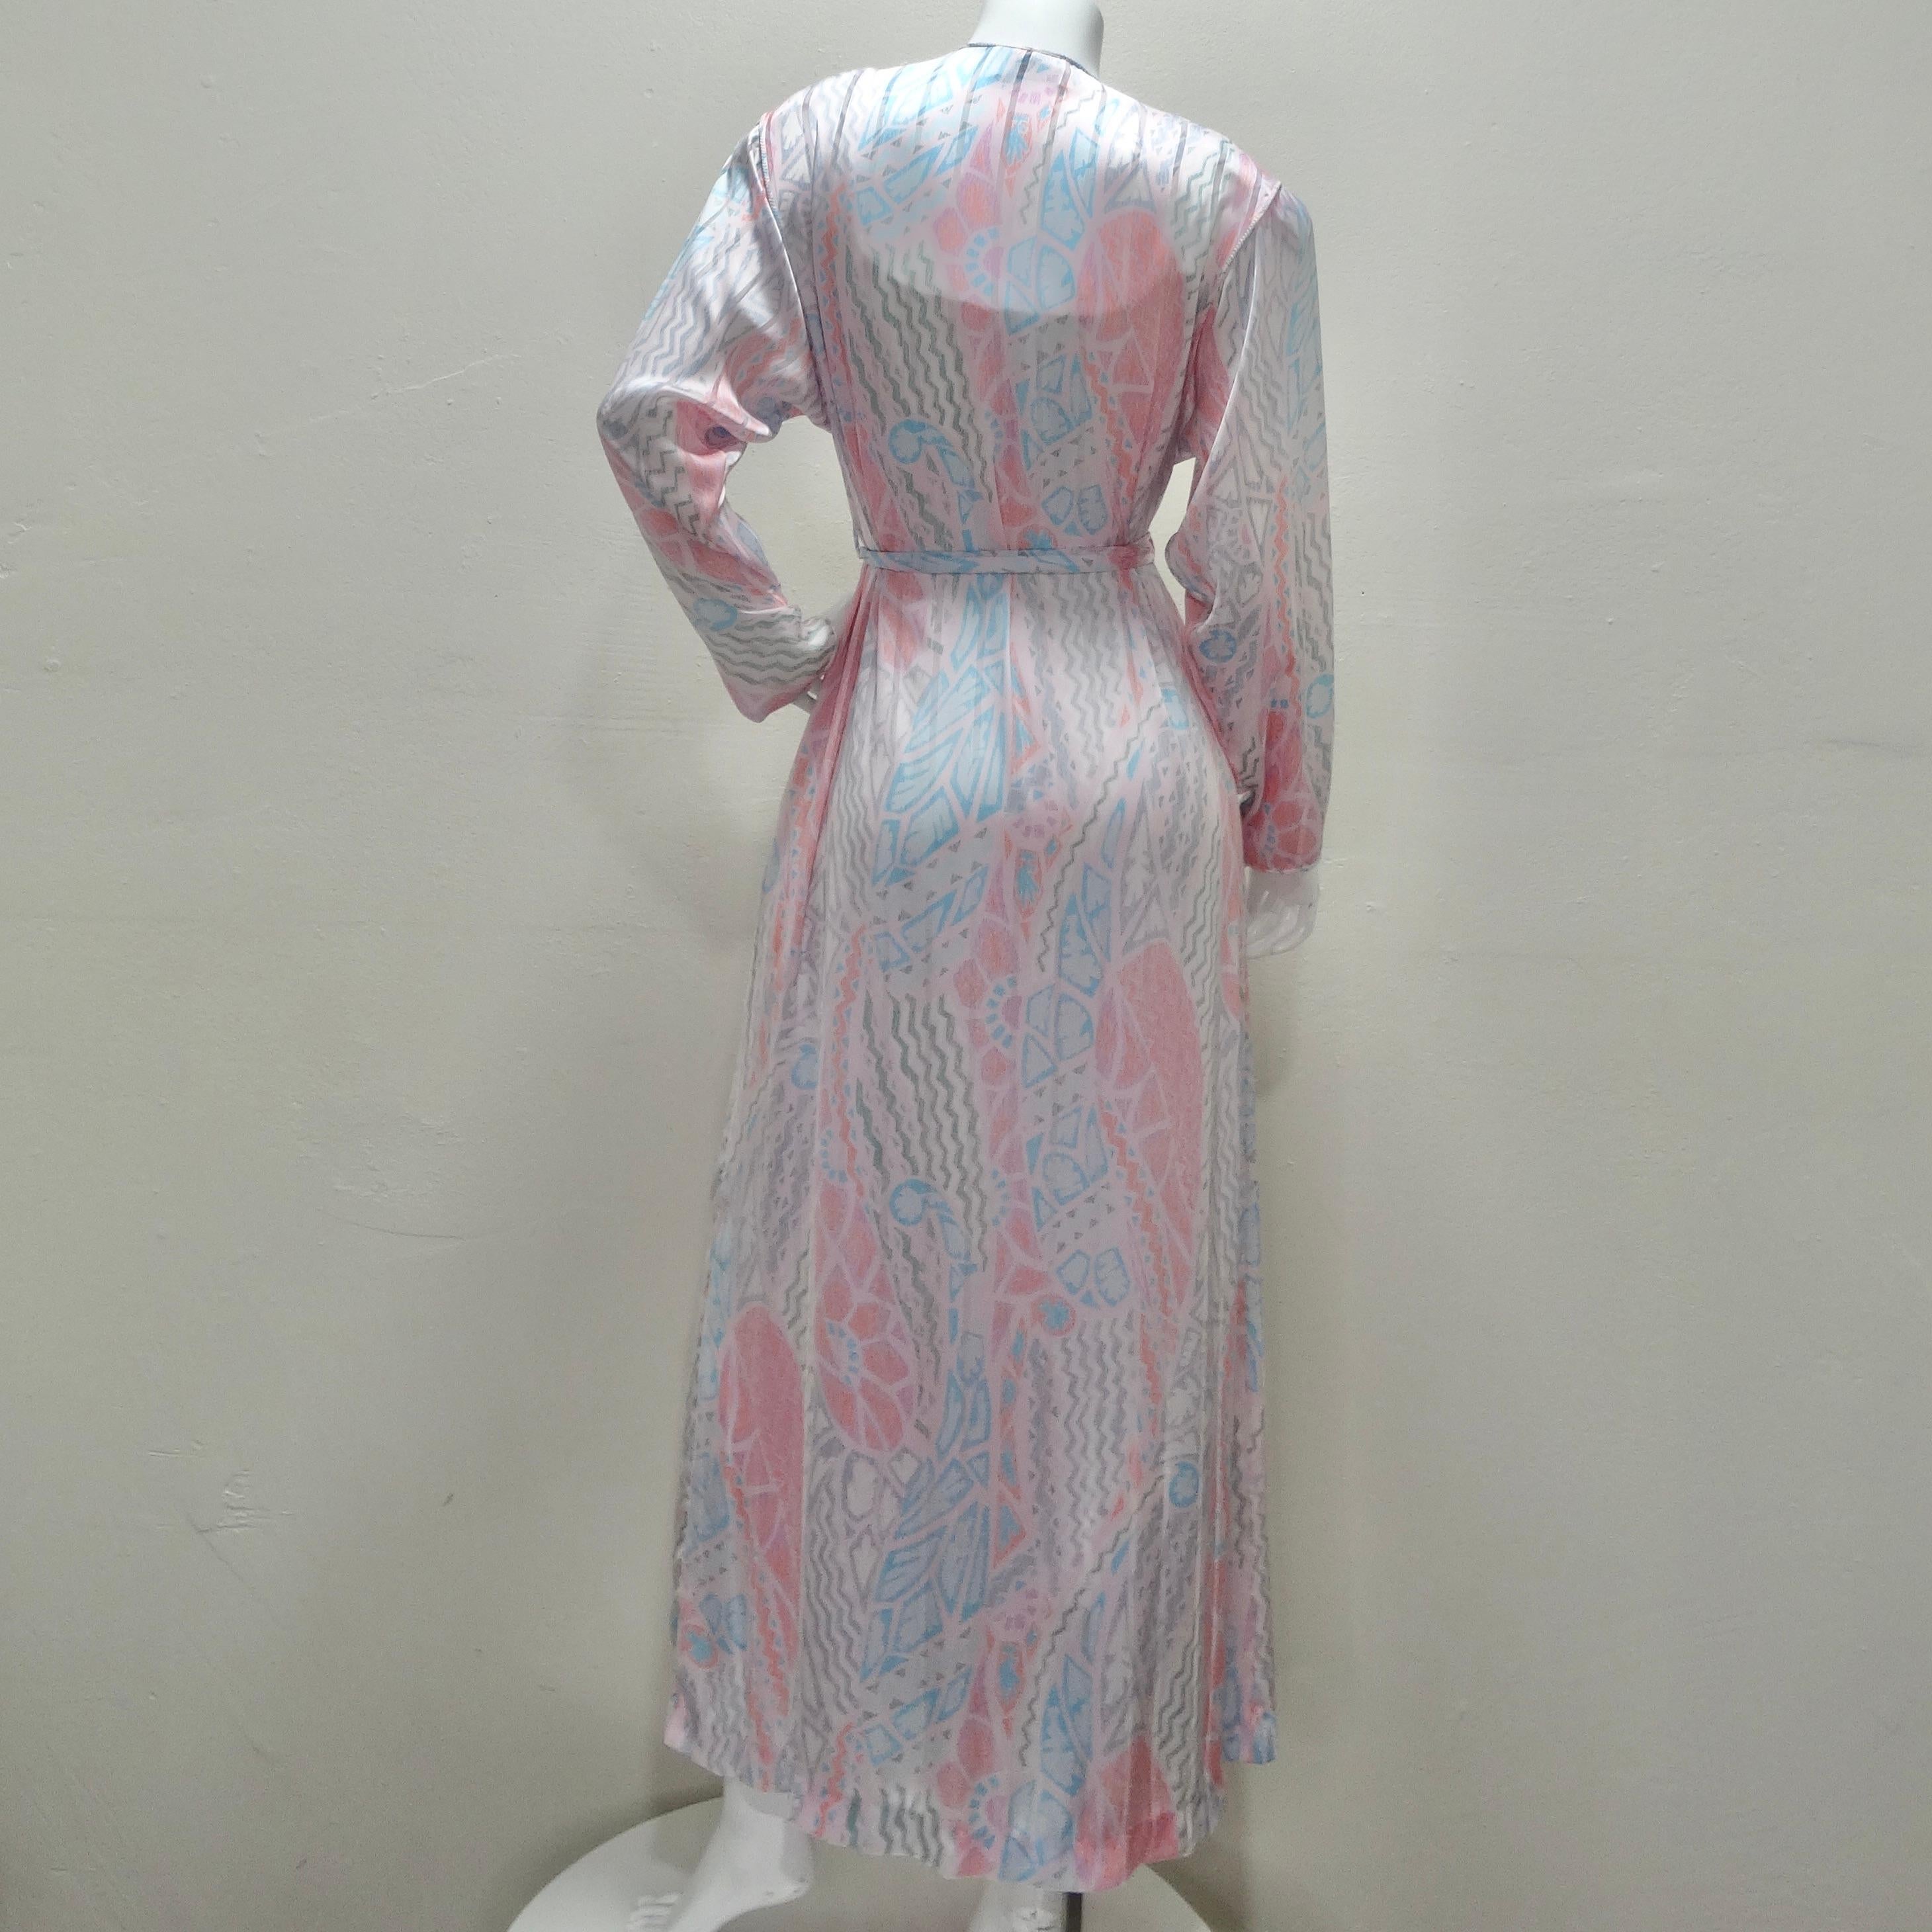 Mary Mcfadden 1980s Printed Robe For Sale 1